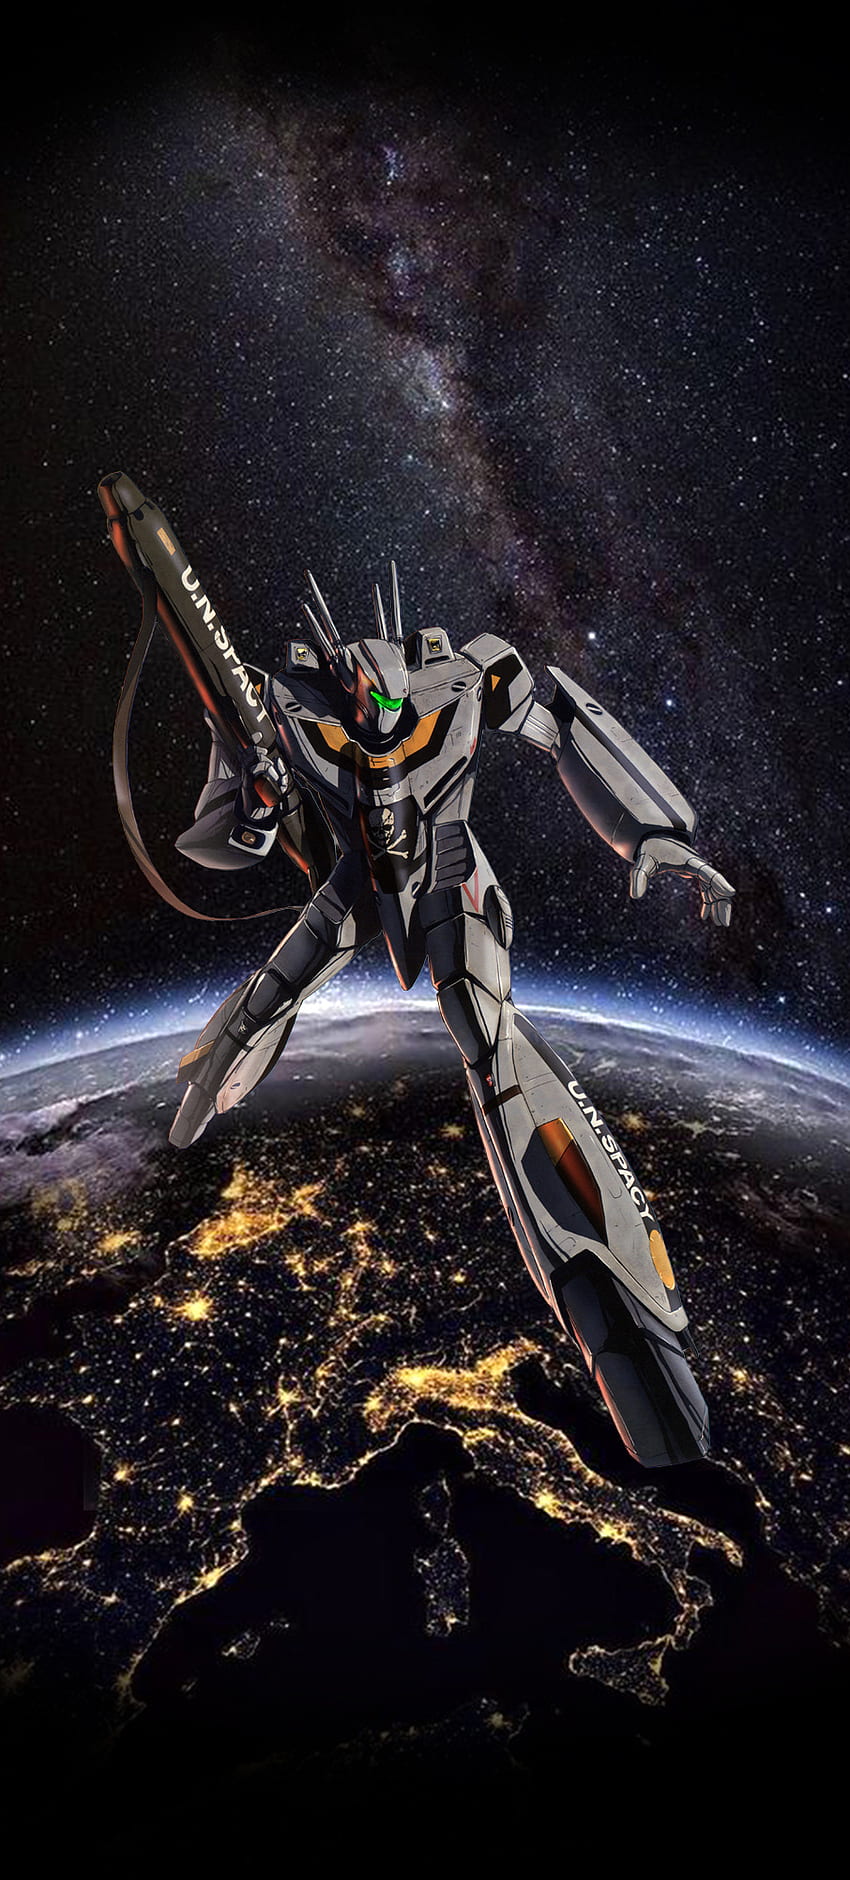 MACROSS/ROBOTECH VALKYRIE VF-1S VF-1A Poster 12inchesx18inches Free  Shipping £9.41 - PicClick UK